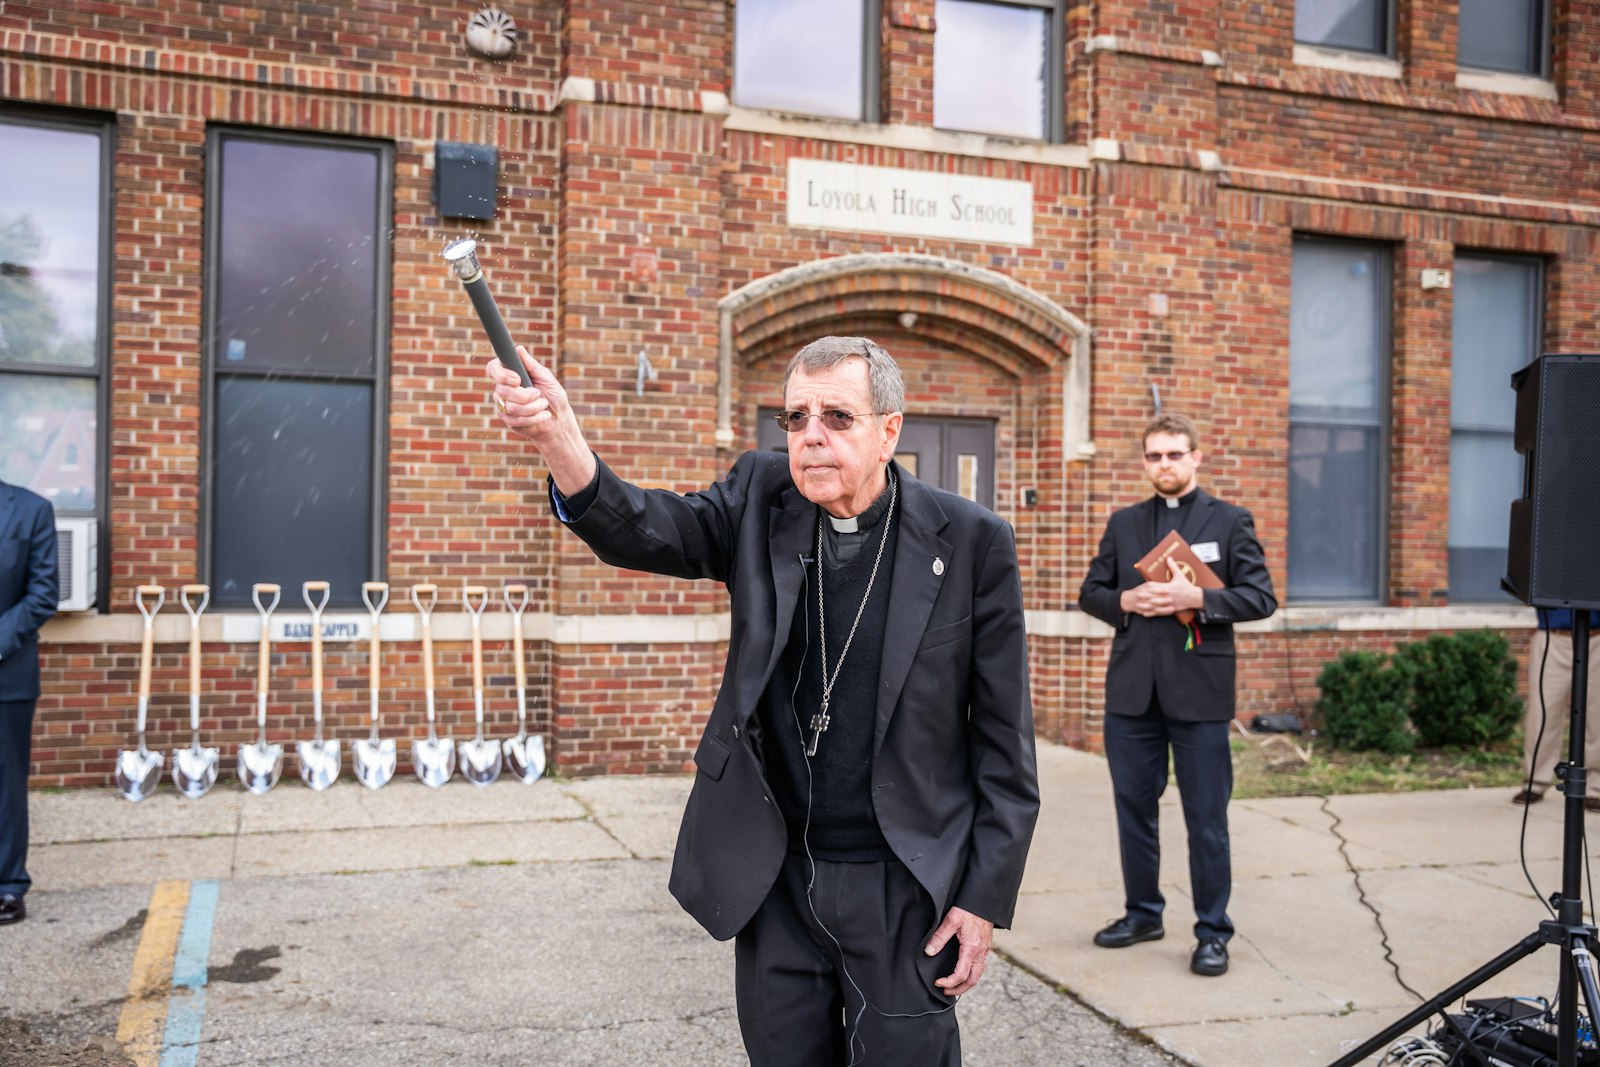 Archbishop Allen H. Vigneron blesses the site of the future St. Peter Claver Chapel on the campus of Loyola High School in northwest Detroit on Sept. 13.